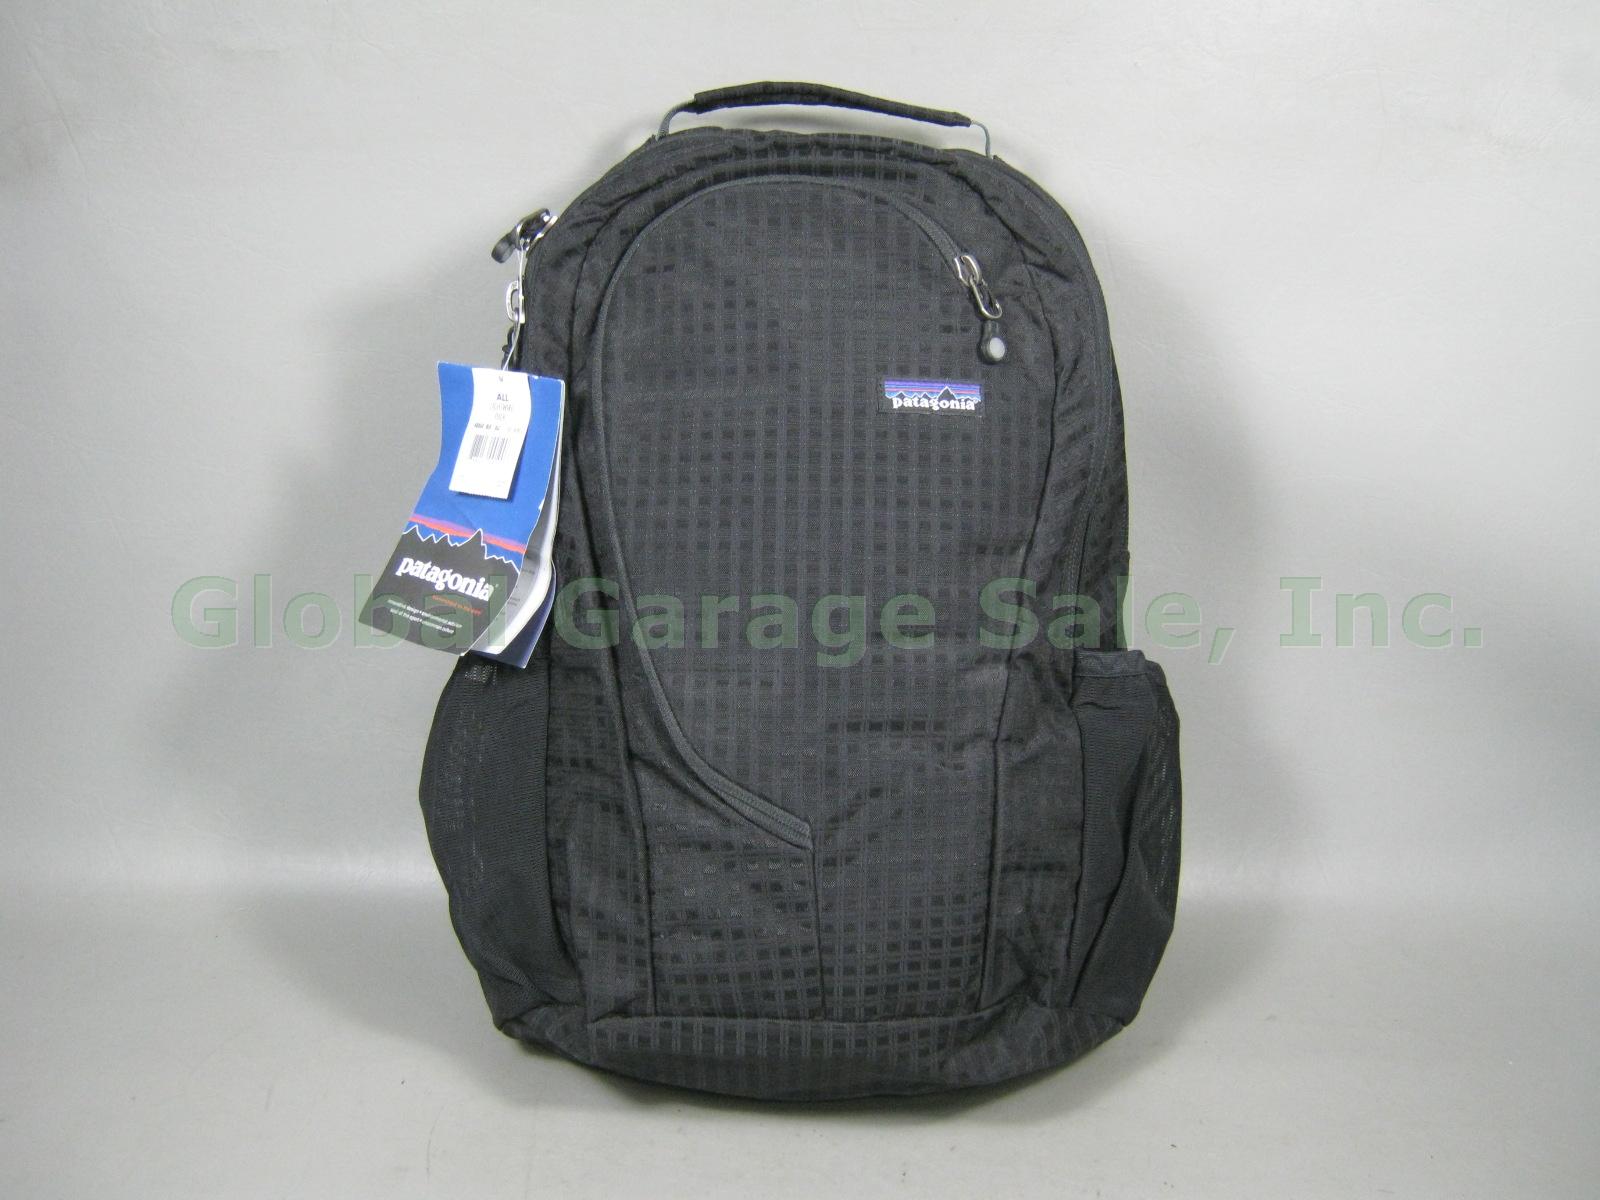 NWT Patagonia ALL Lightwire Backpack Laptop Computer Book School Bag Day Pack NR